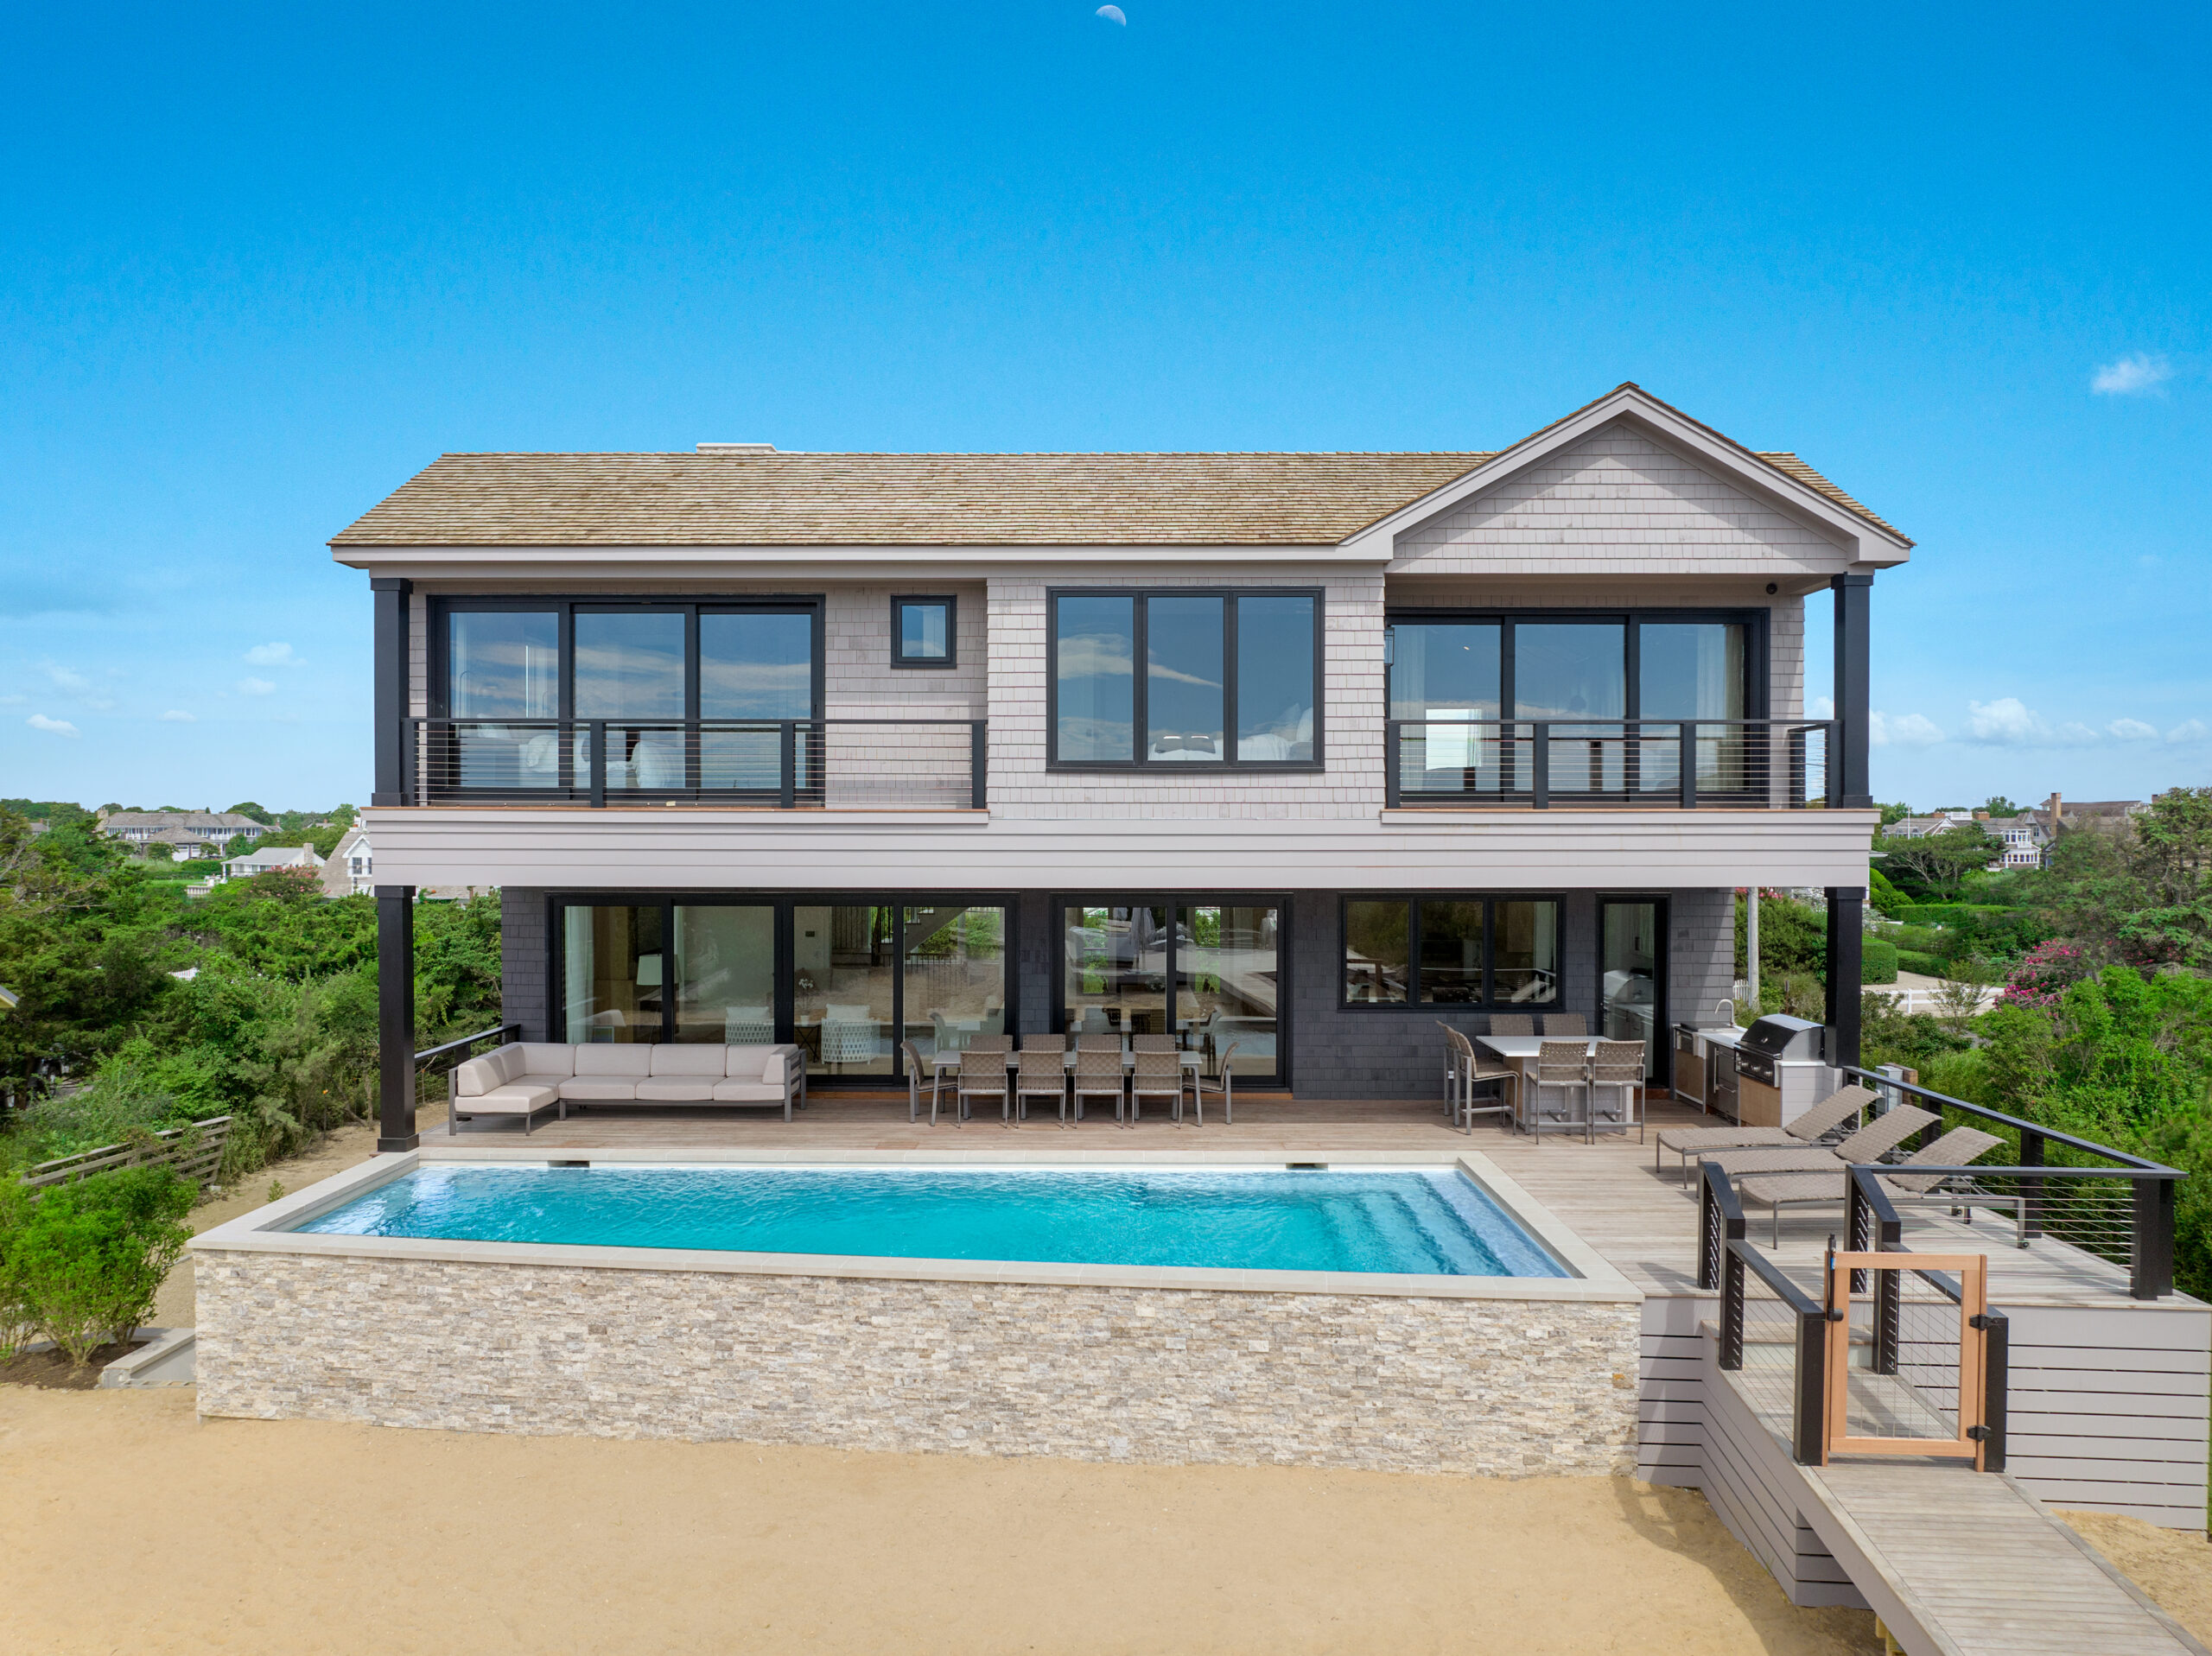 The new build by George Vickers at 98 Dune Road in Quogue sold for $11.75 million.  LPG/COURTESY DOUGLAS ELLIMAN